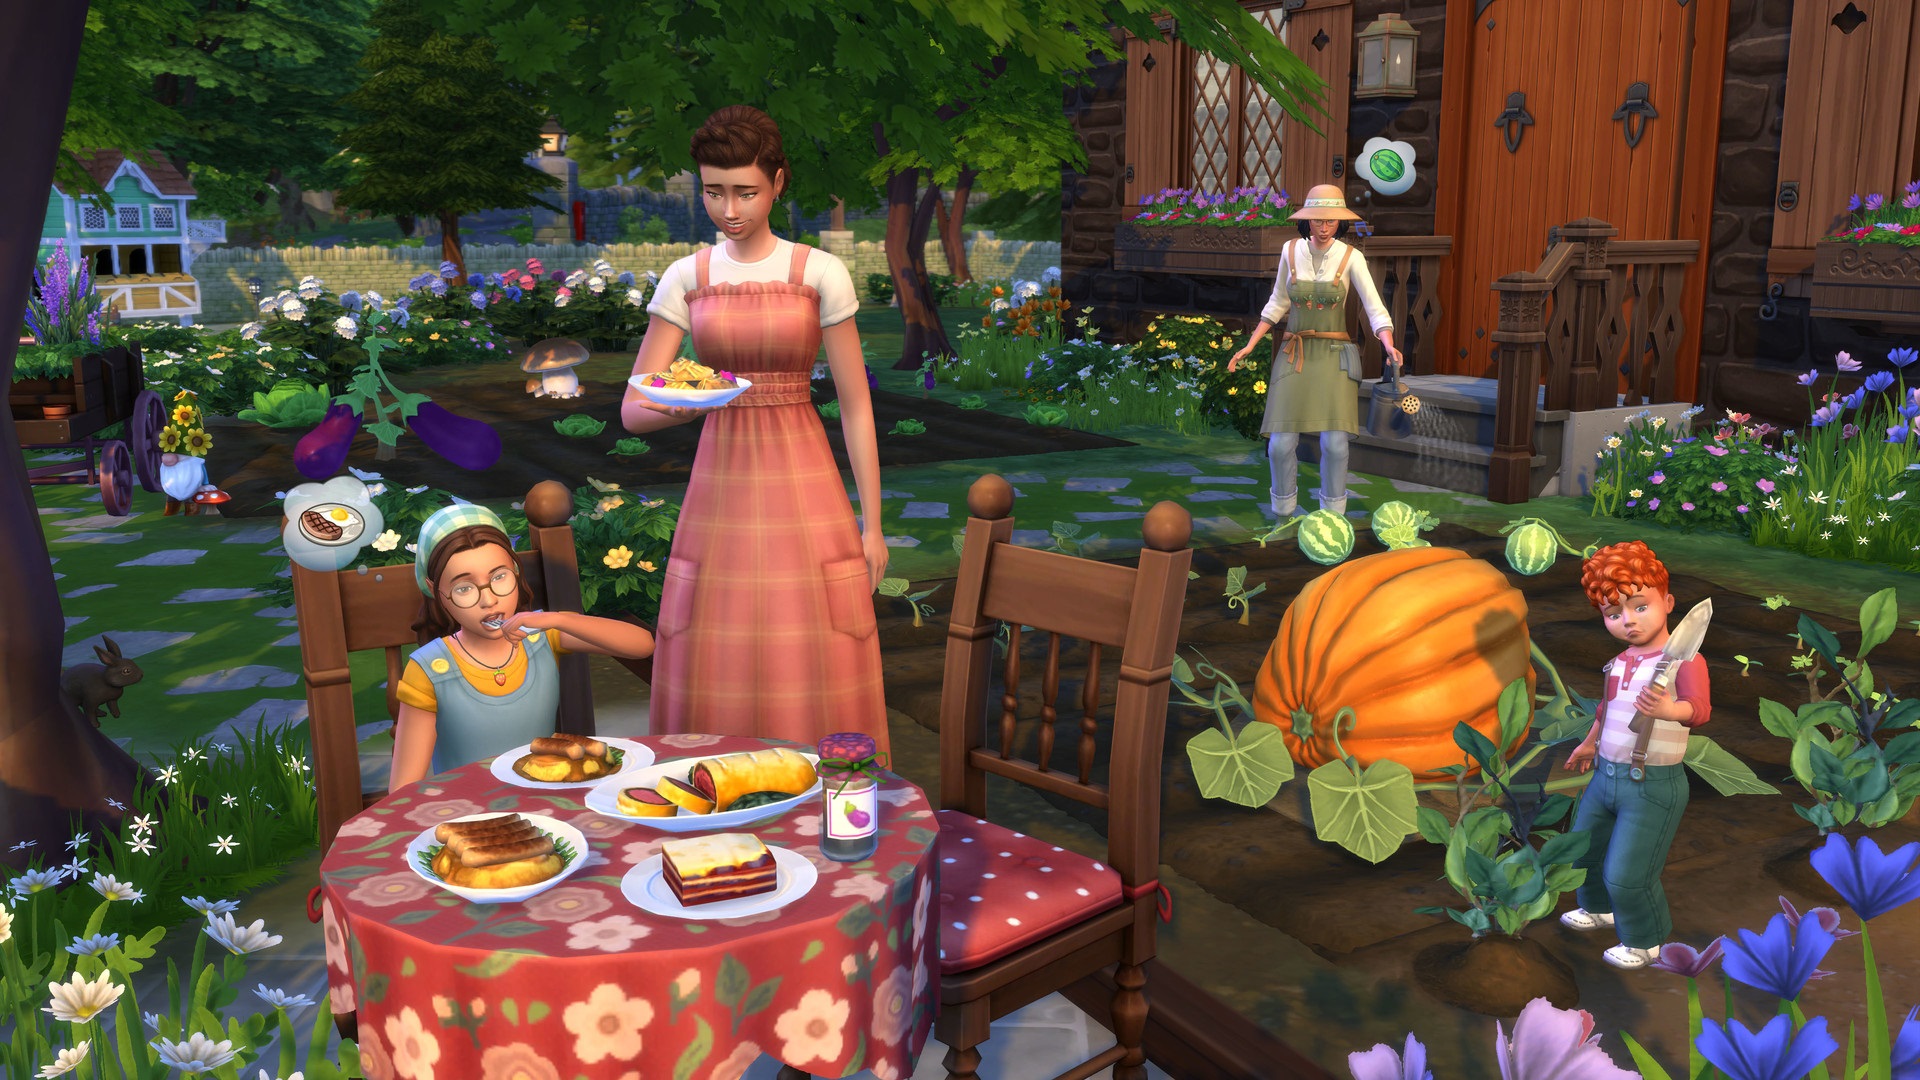 The Sims 4: Cottage Living Full Game PC Download